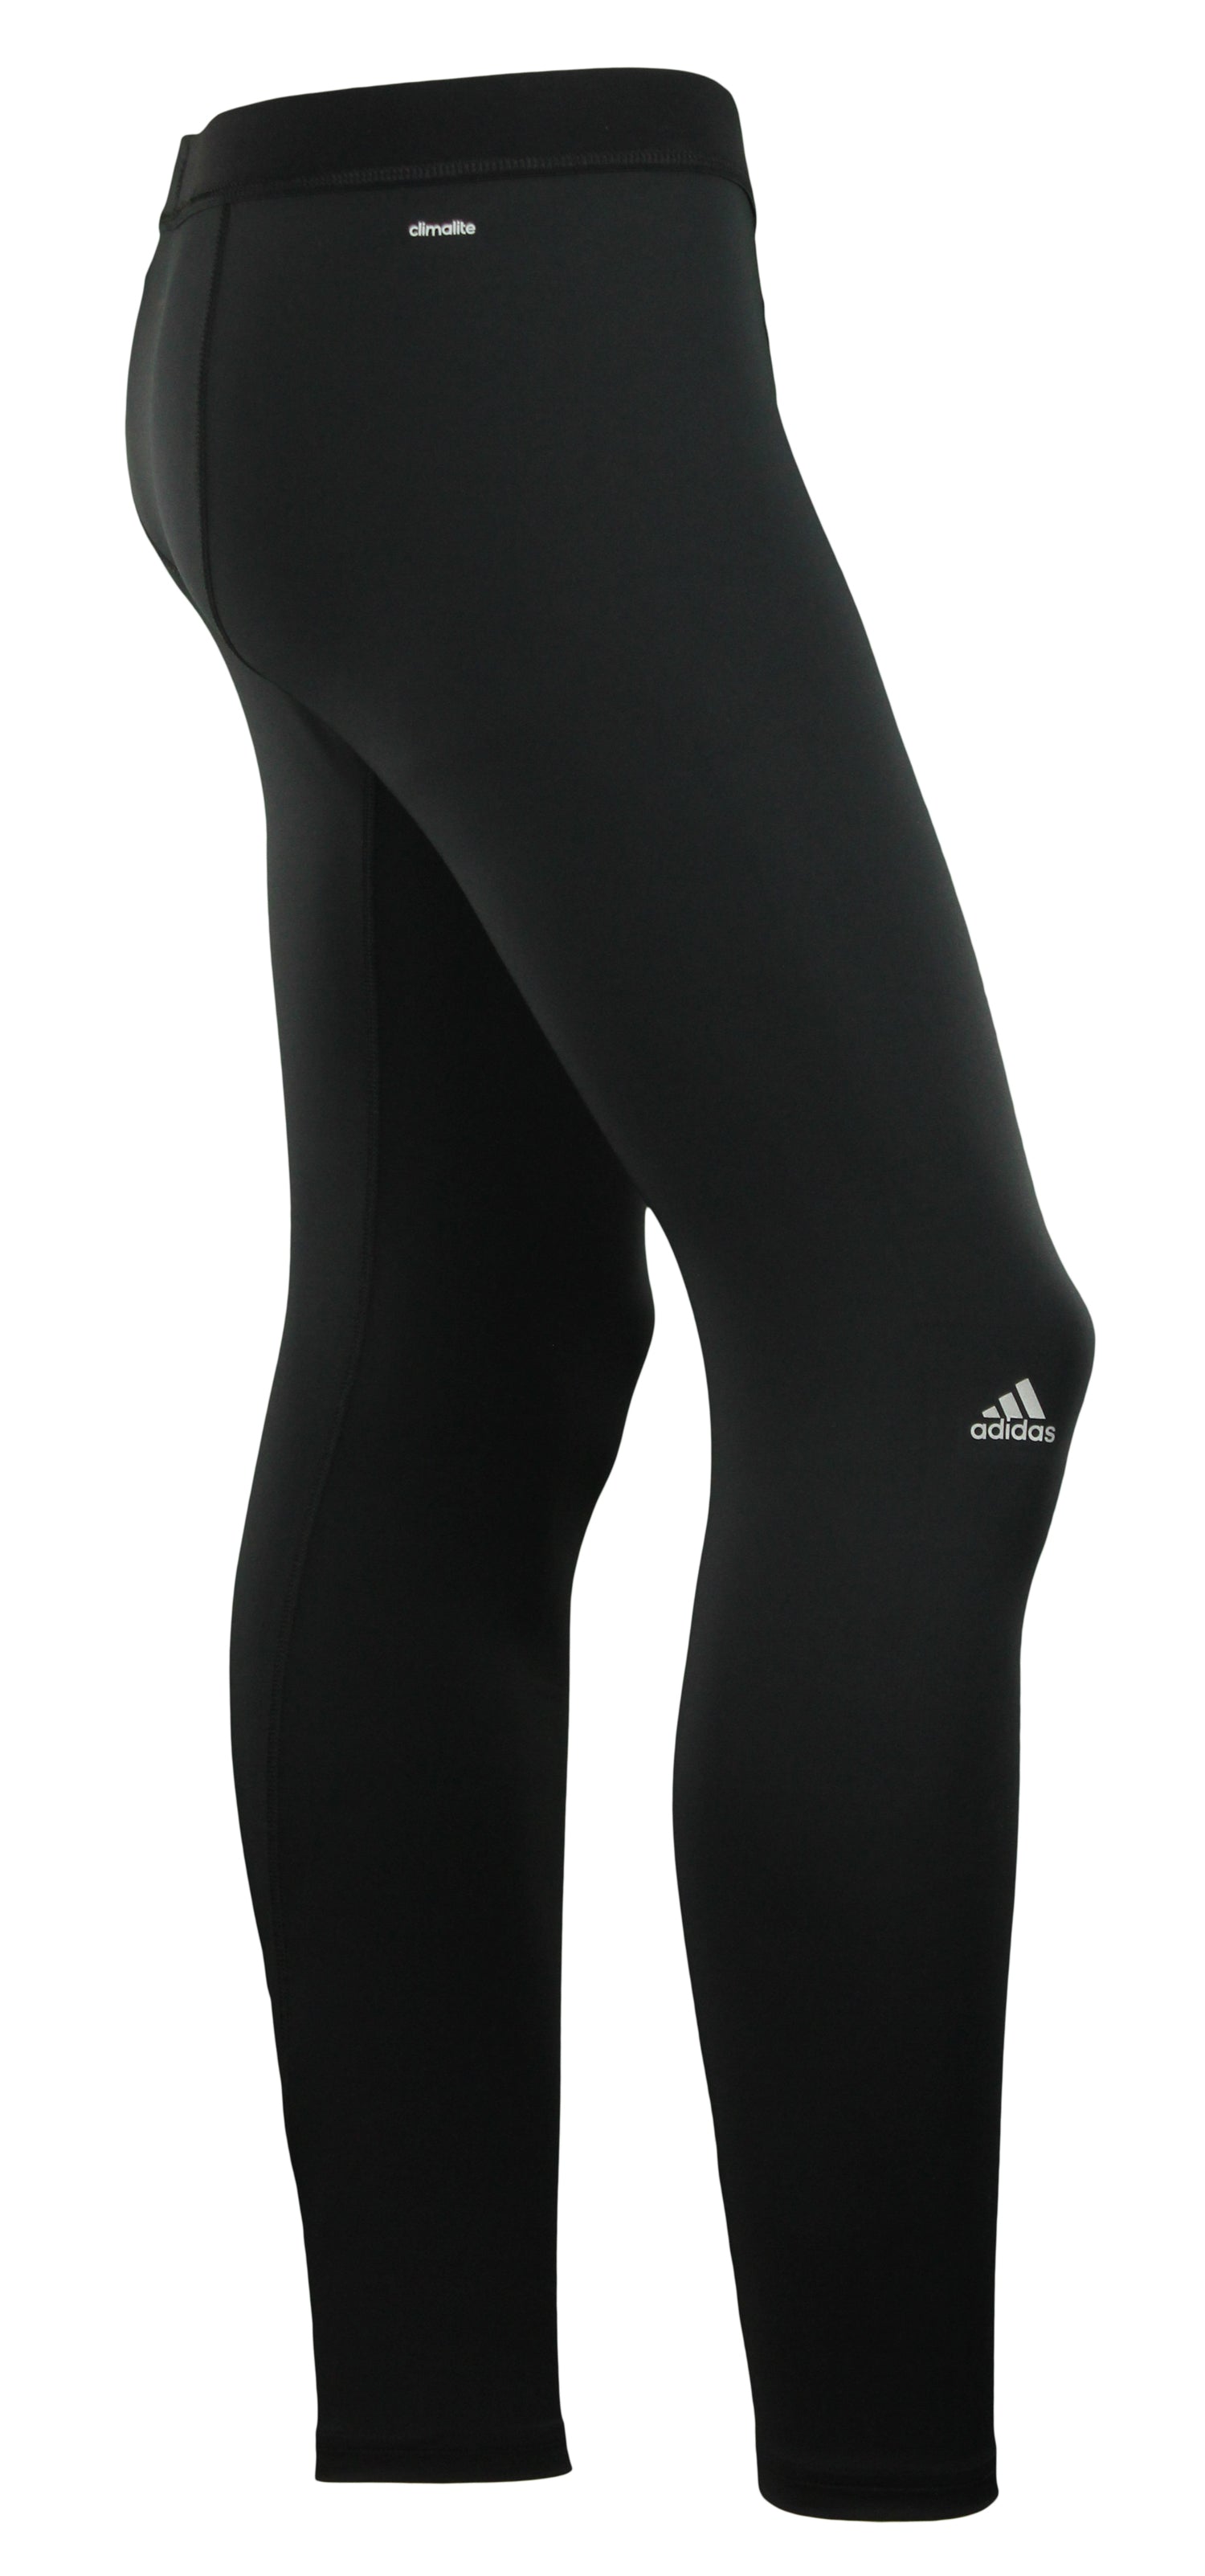 Adidas Black Climalite Athletic Leggings Tights Size Small